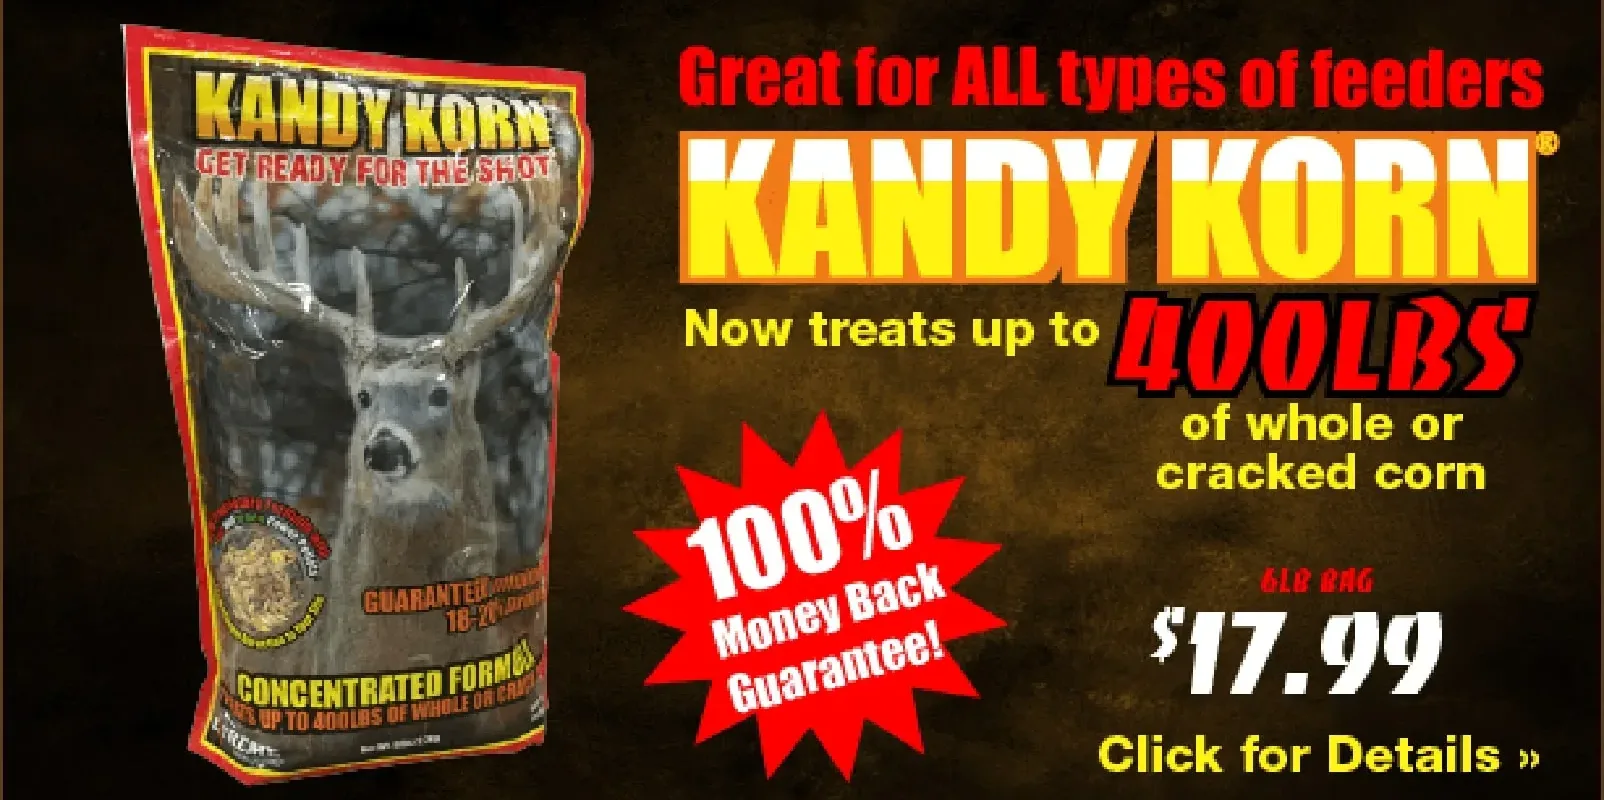 Kandy Korn product concentrated formula can be mixed with up to 400 pounds of corn